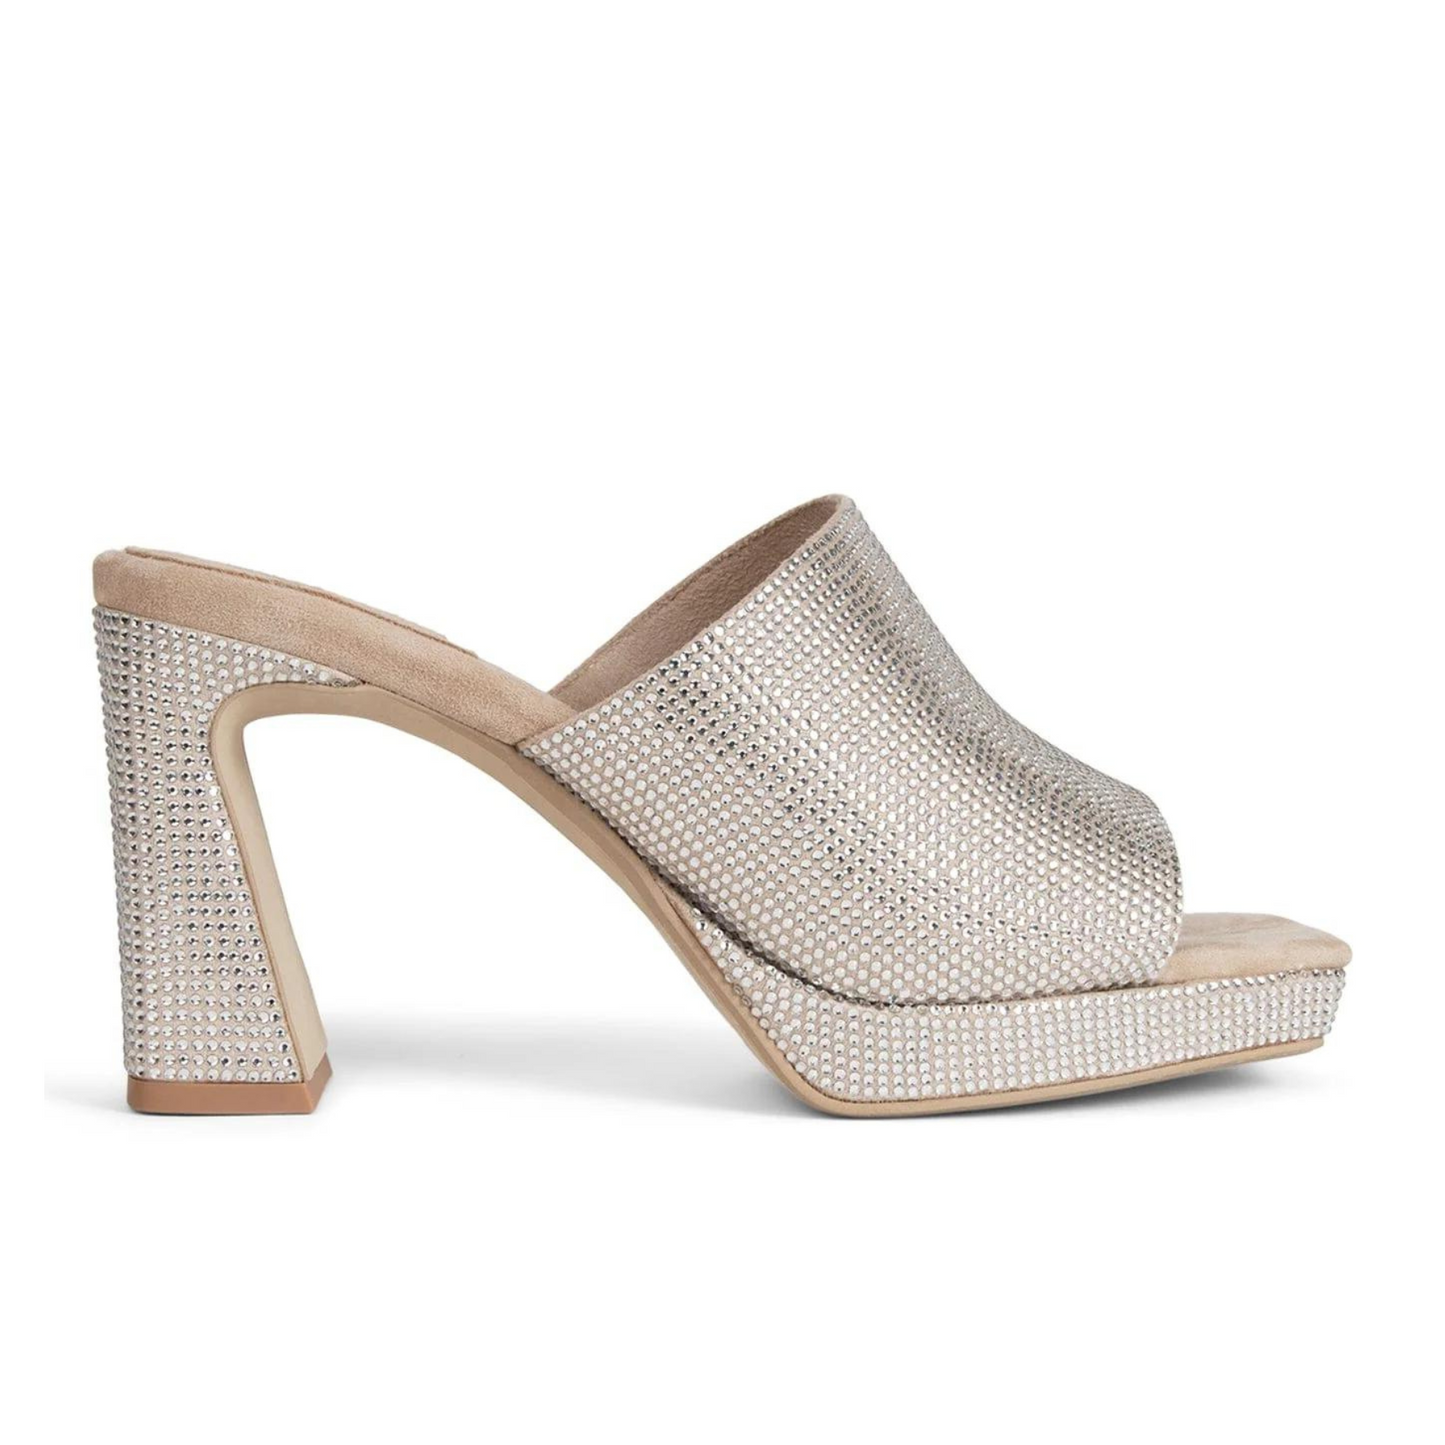 Jeffrey Campbell Caviar JS - Nude Suede Champagne